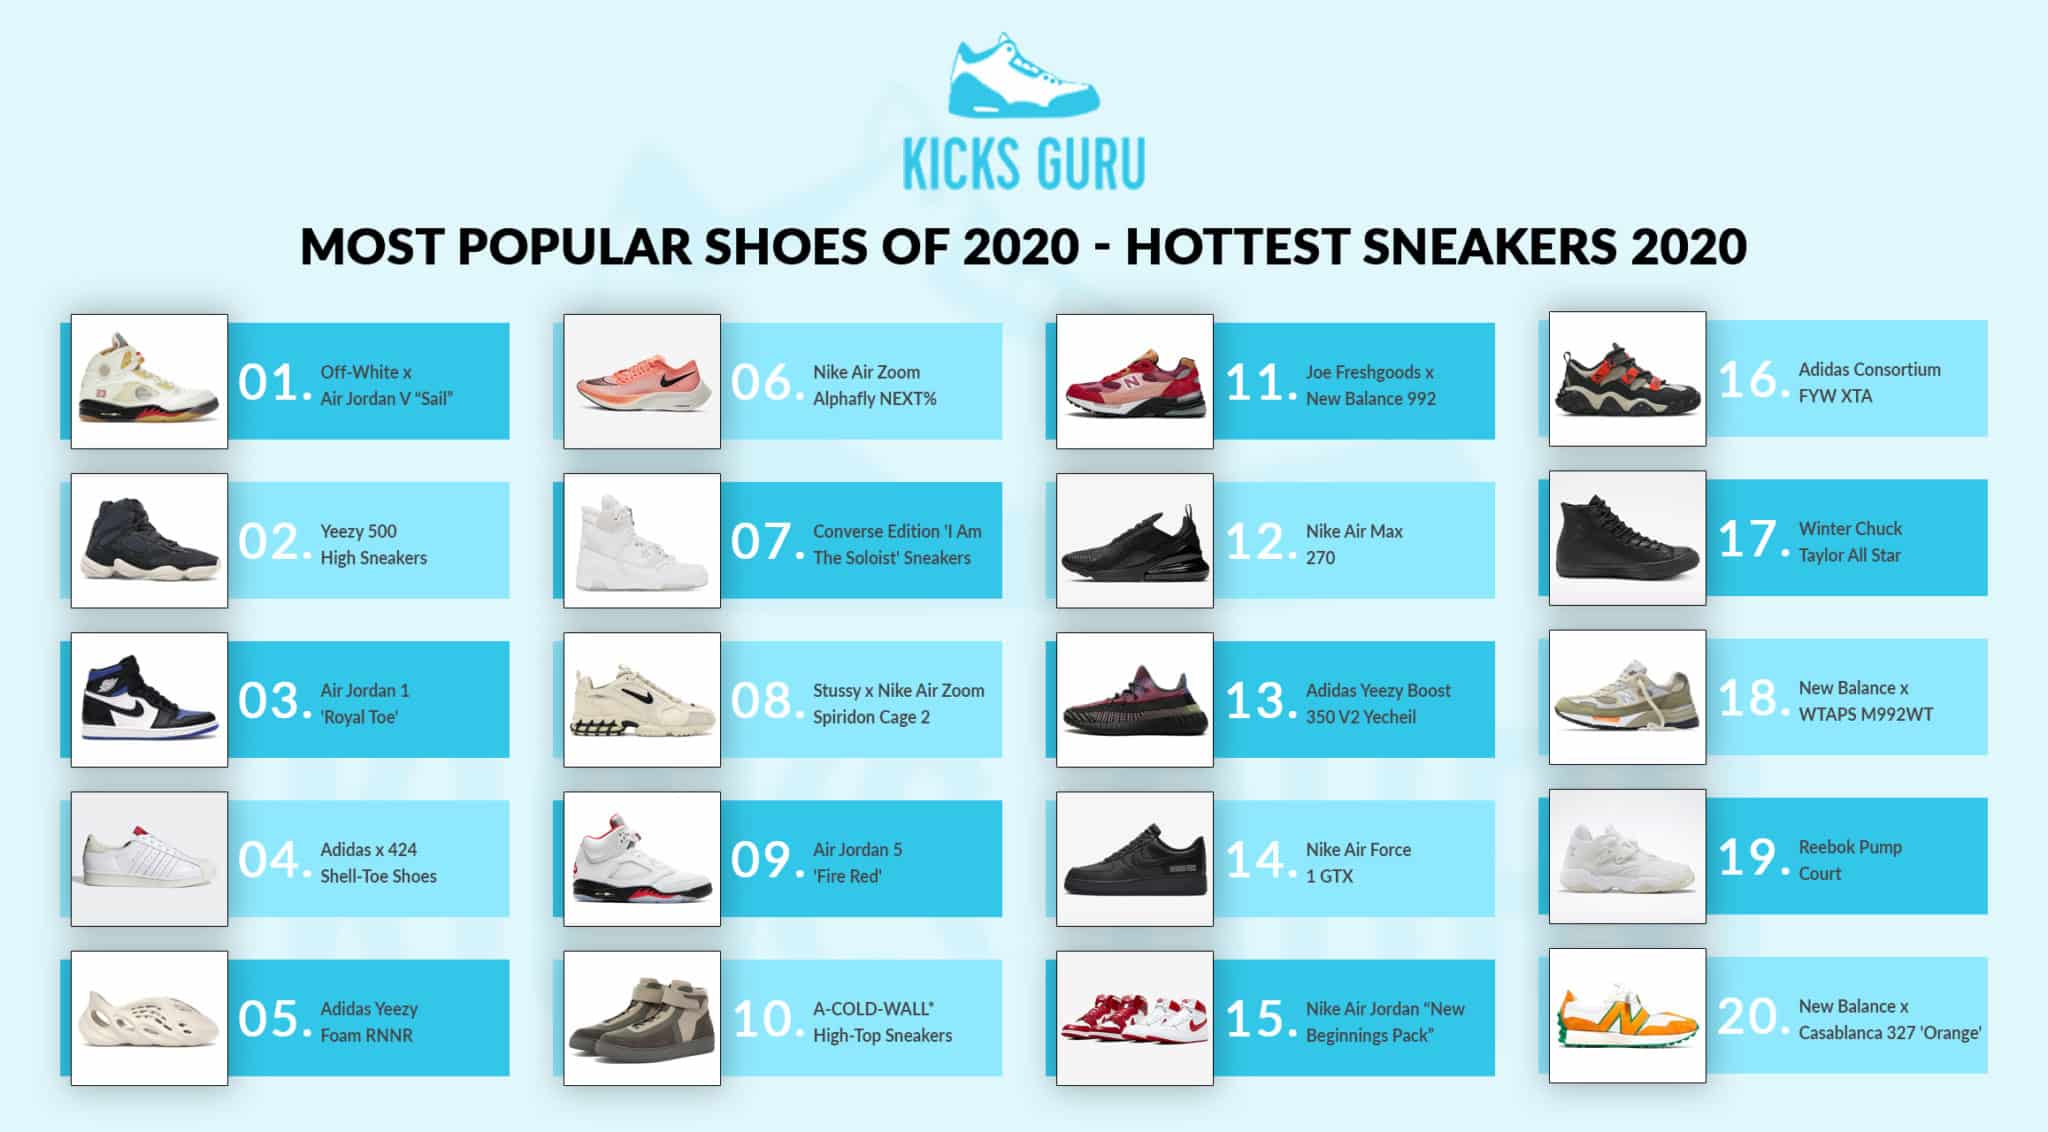 Most Popular Shoes of 2020